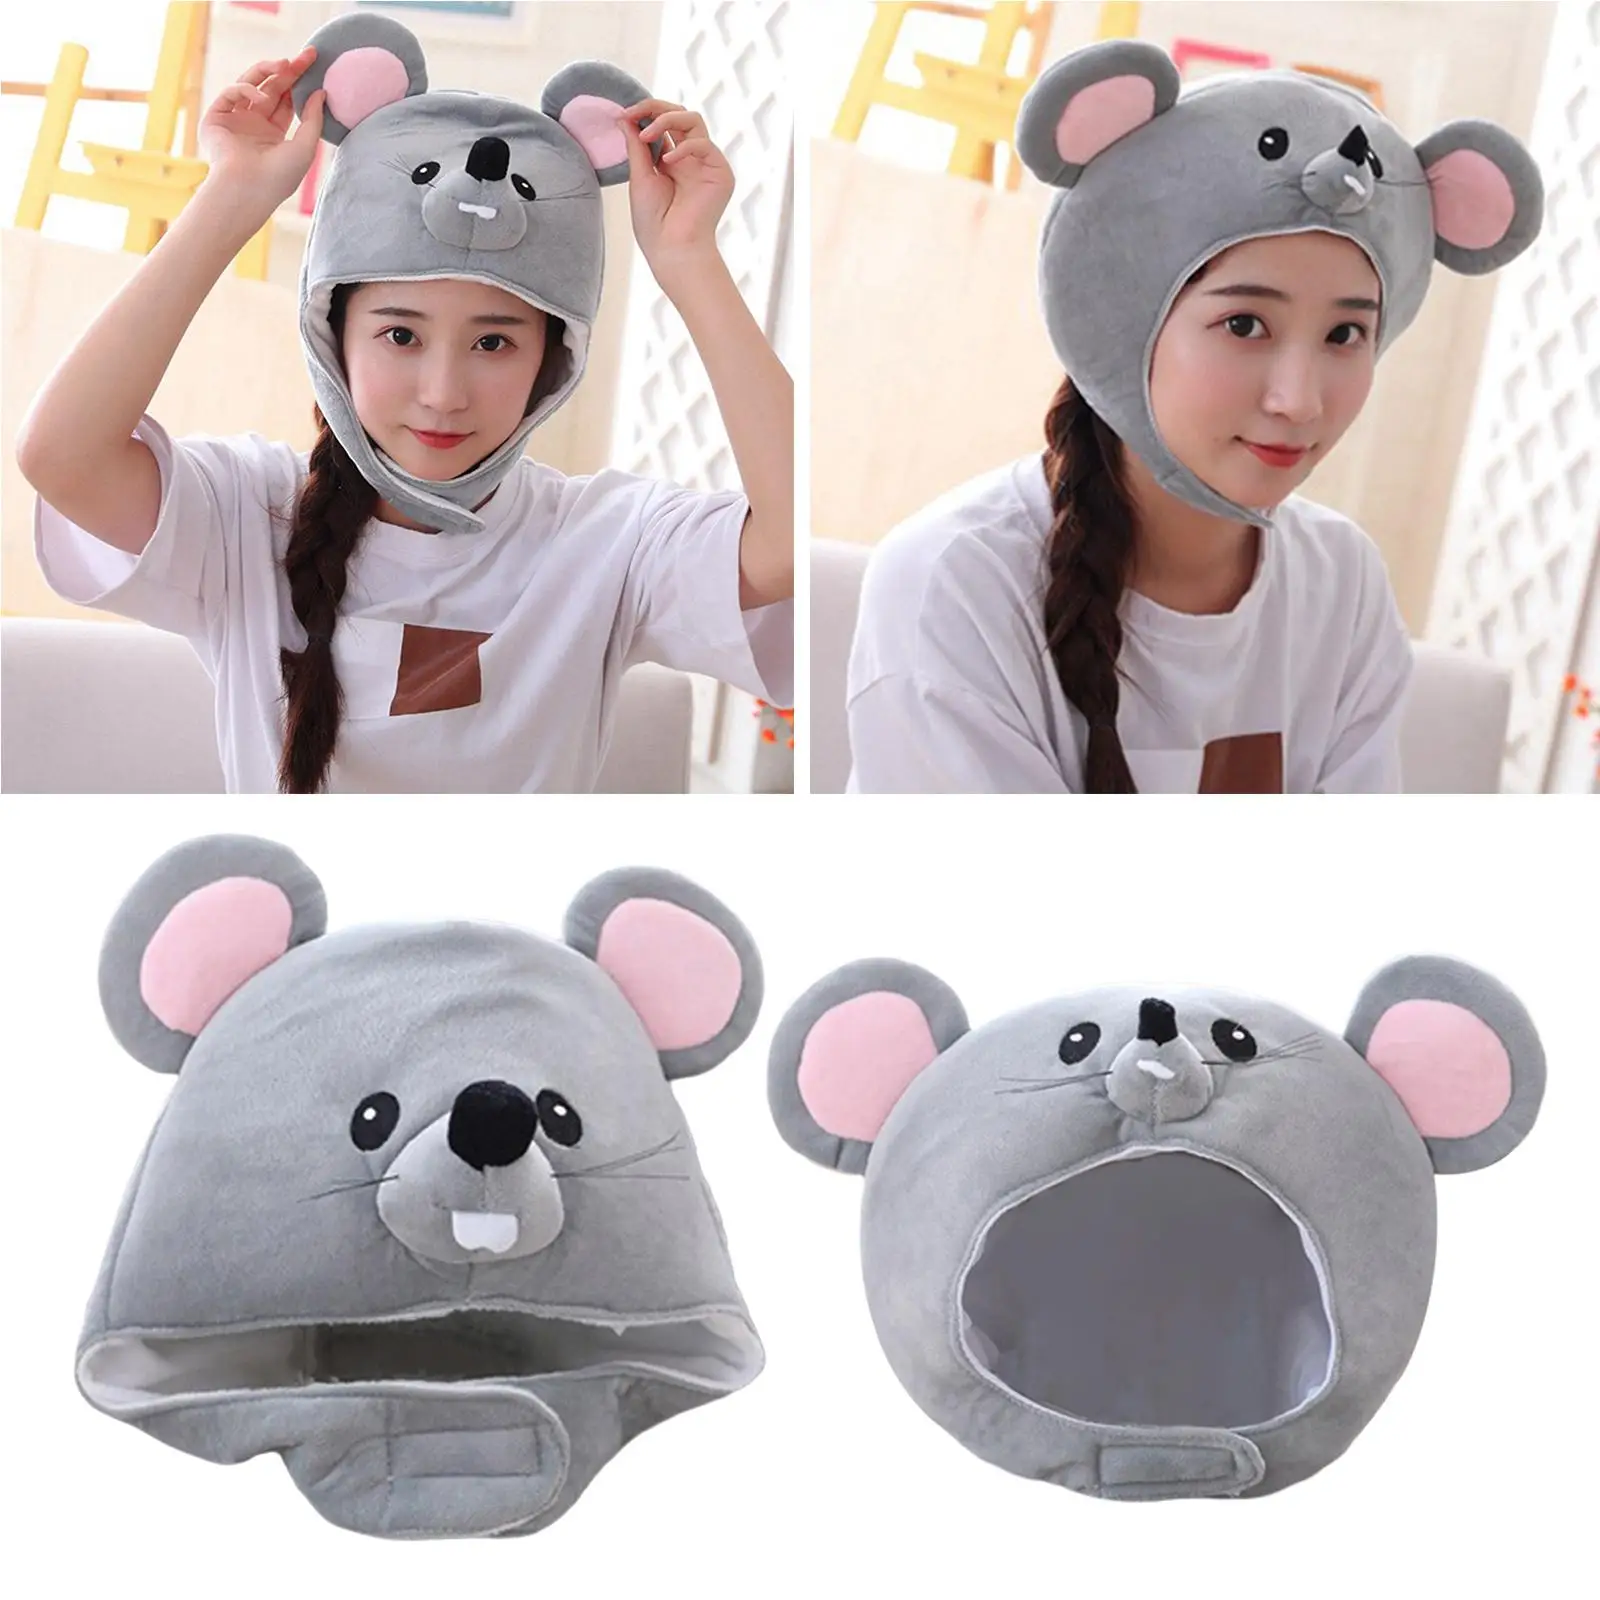 Gray Mouse Hat Teens Gift Photography Props Headband Animal Soft for Christmas Party Selfie Halloween Accessories